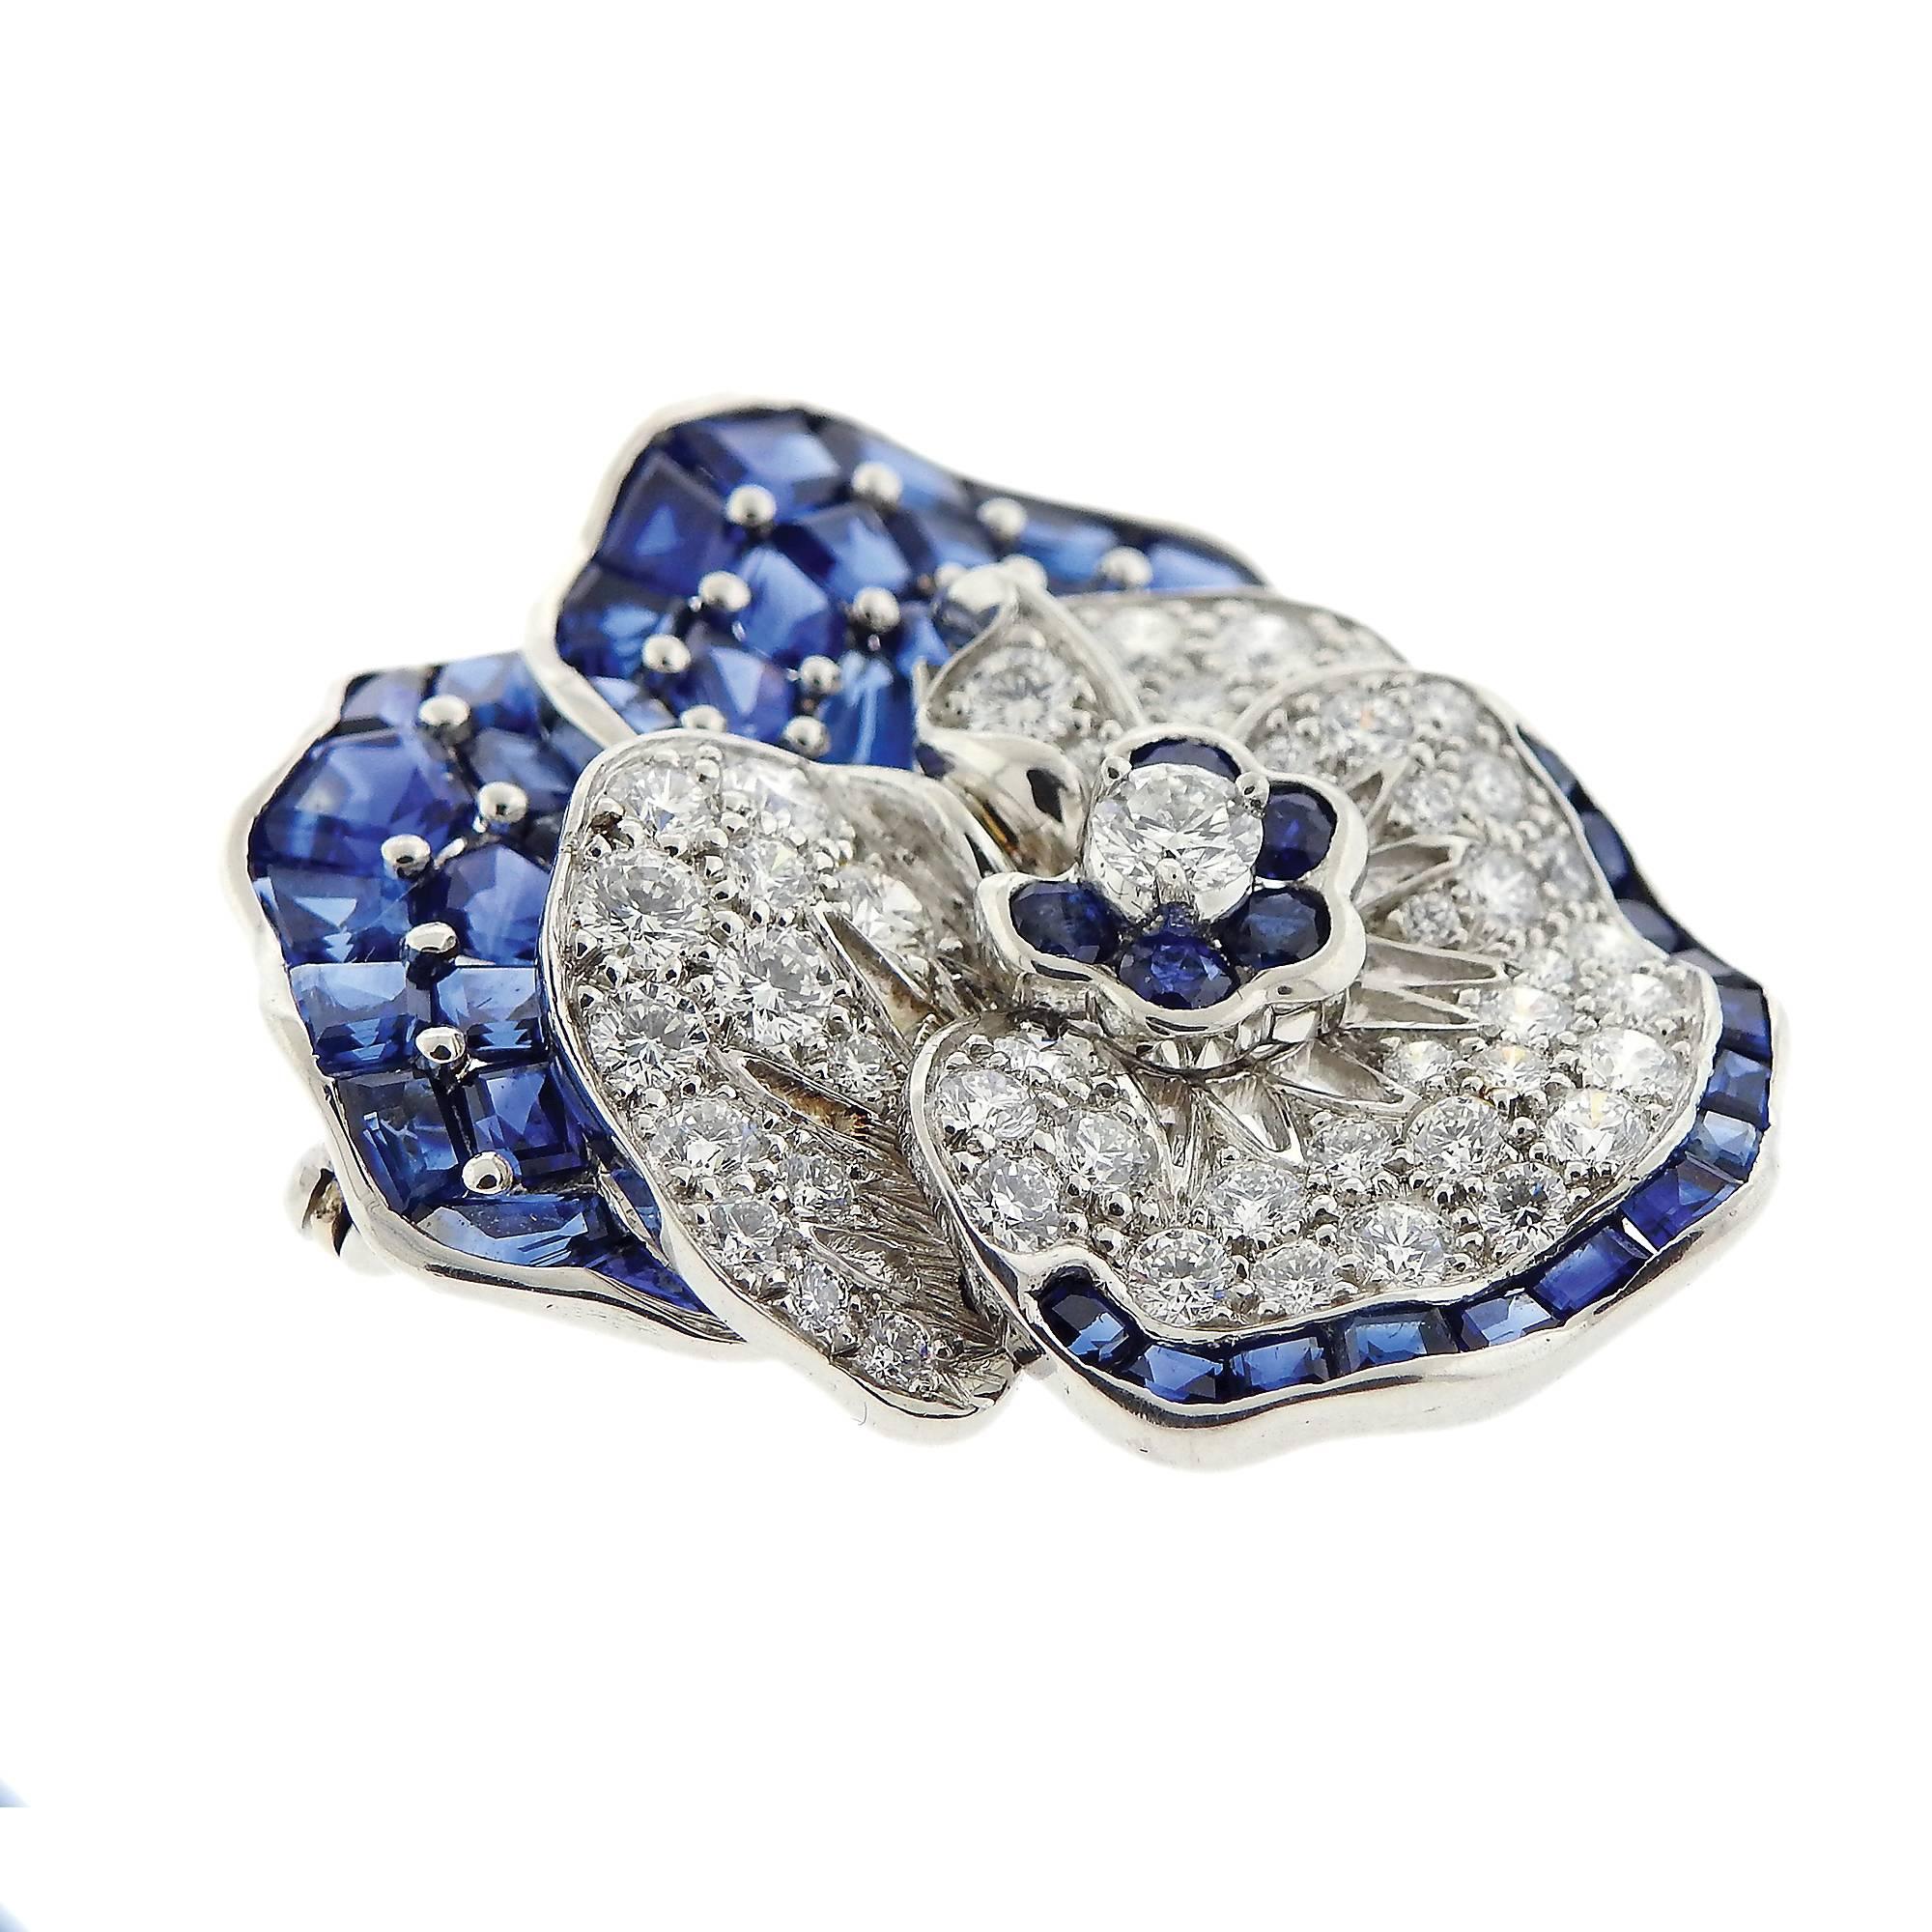 Large Oscar Heyman Blue Sapphire Diamond Platinum Pansy Flower Brooch In Excellent Condition For Sale In Lambertville, NJ